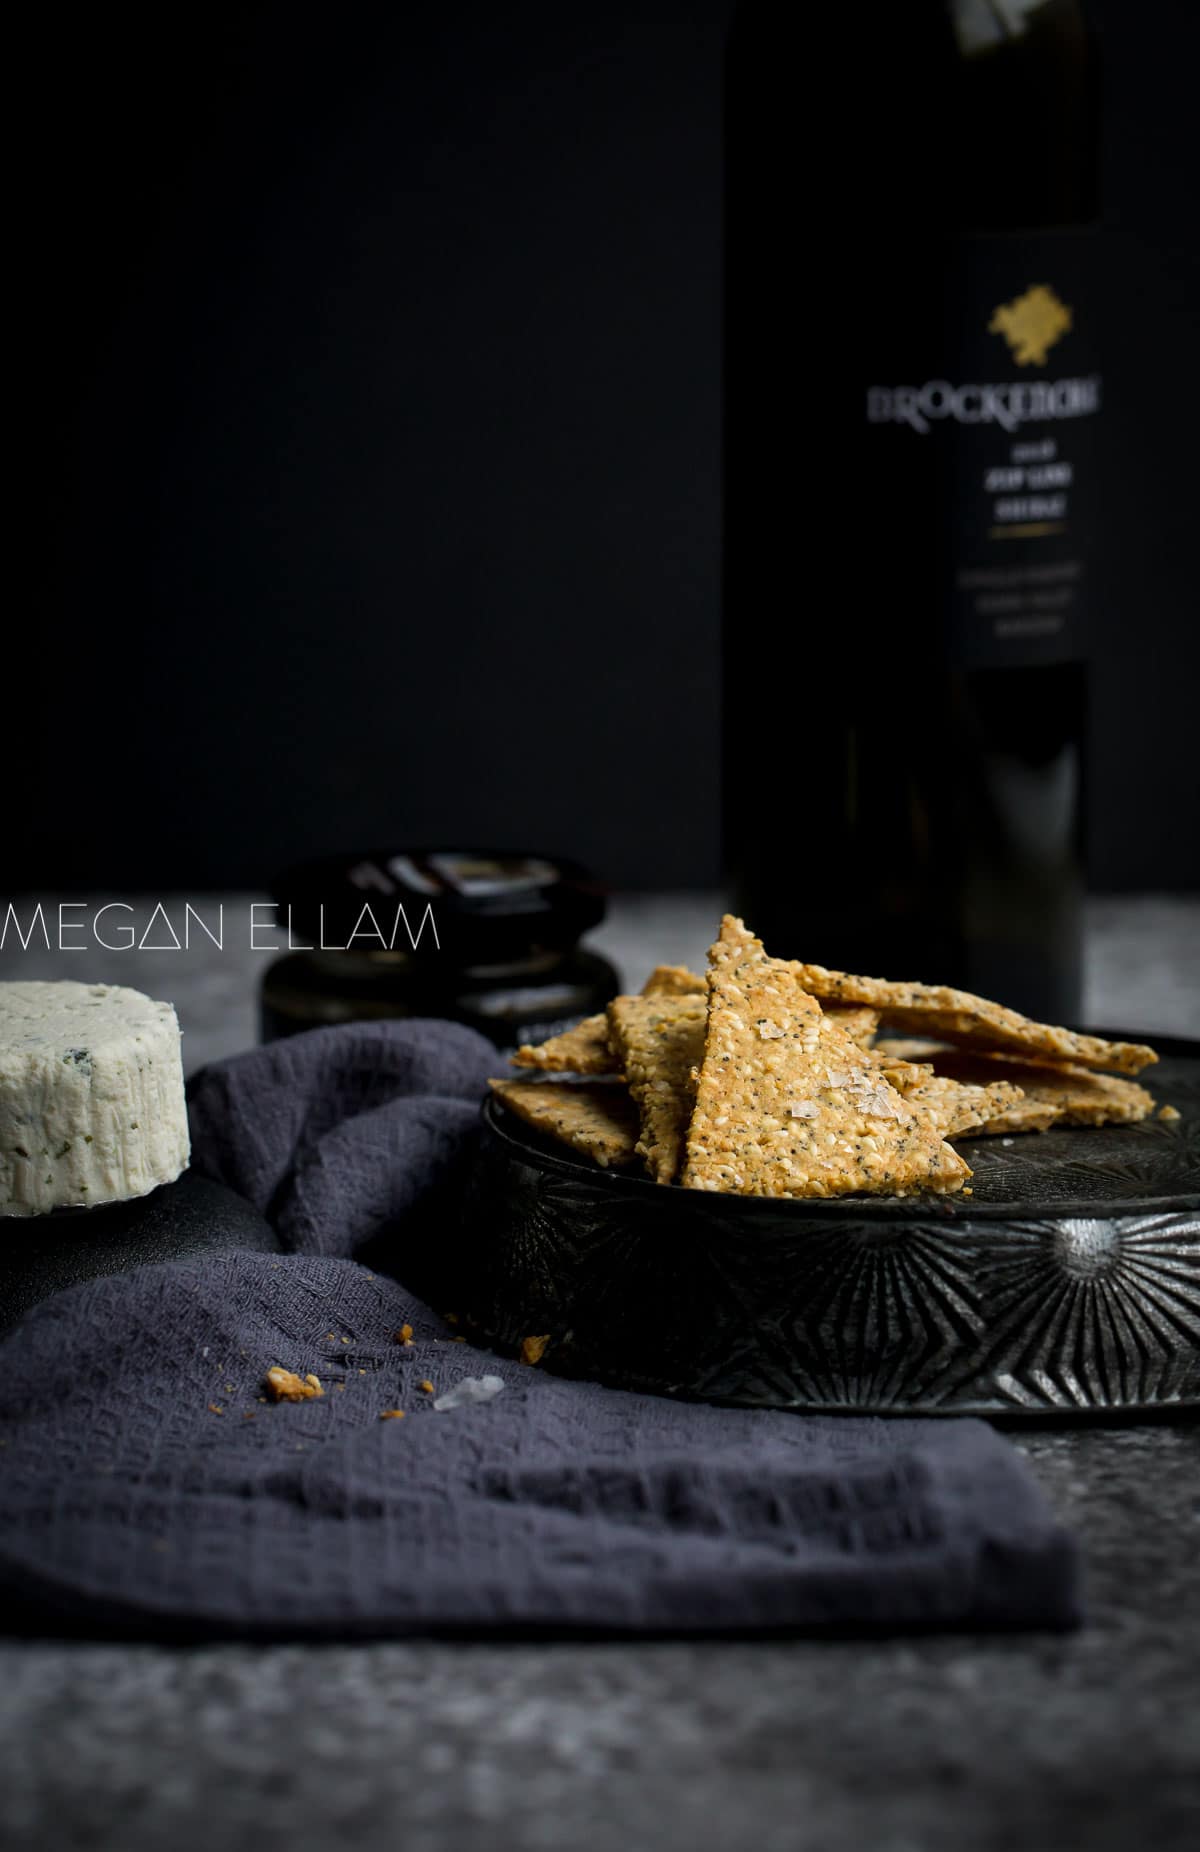 Almond Flour Crackers, a piece of Bousin cheese and a bottle of wine on a black towel.